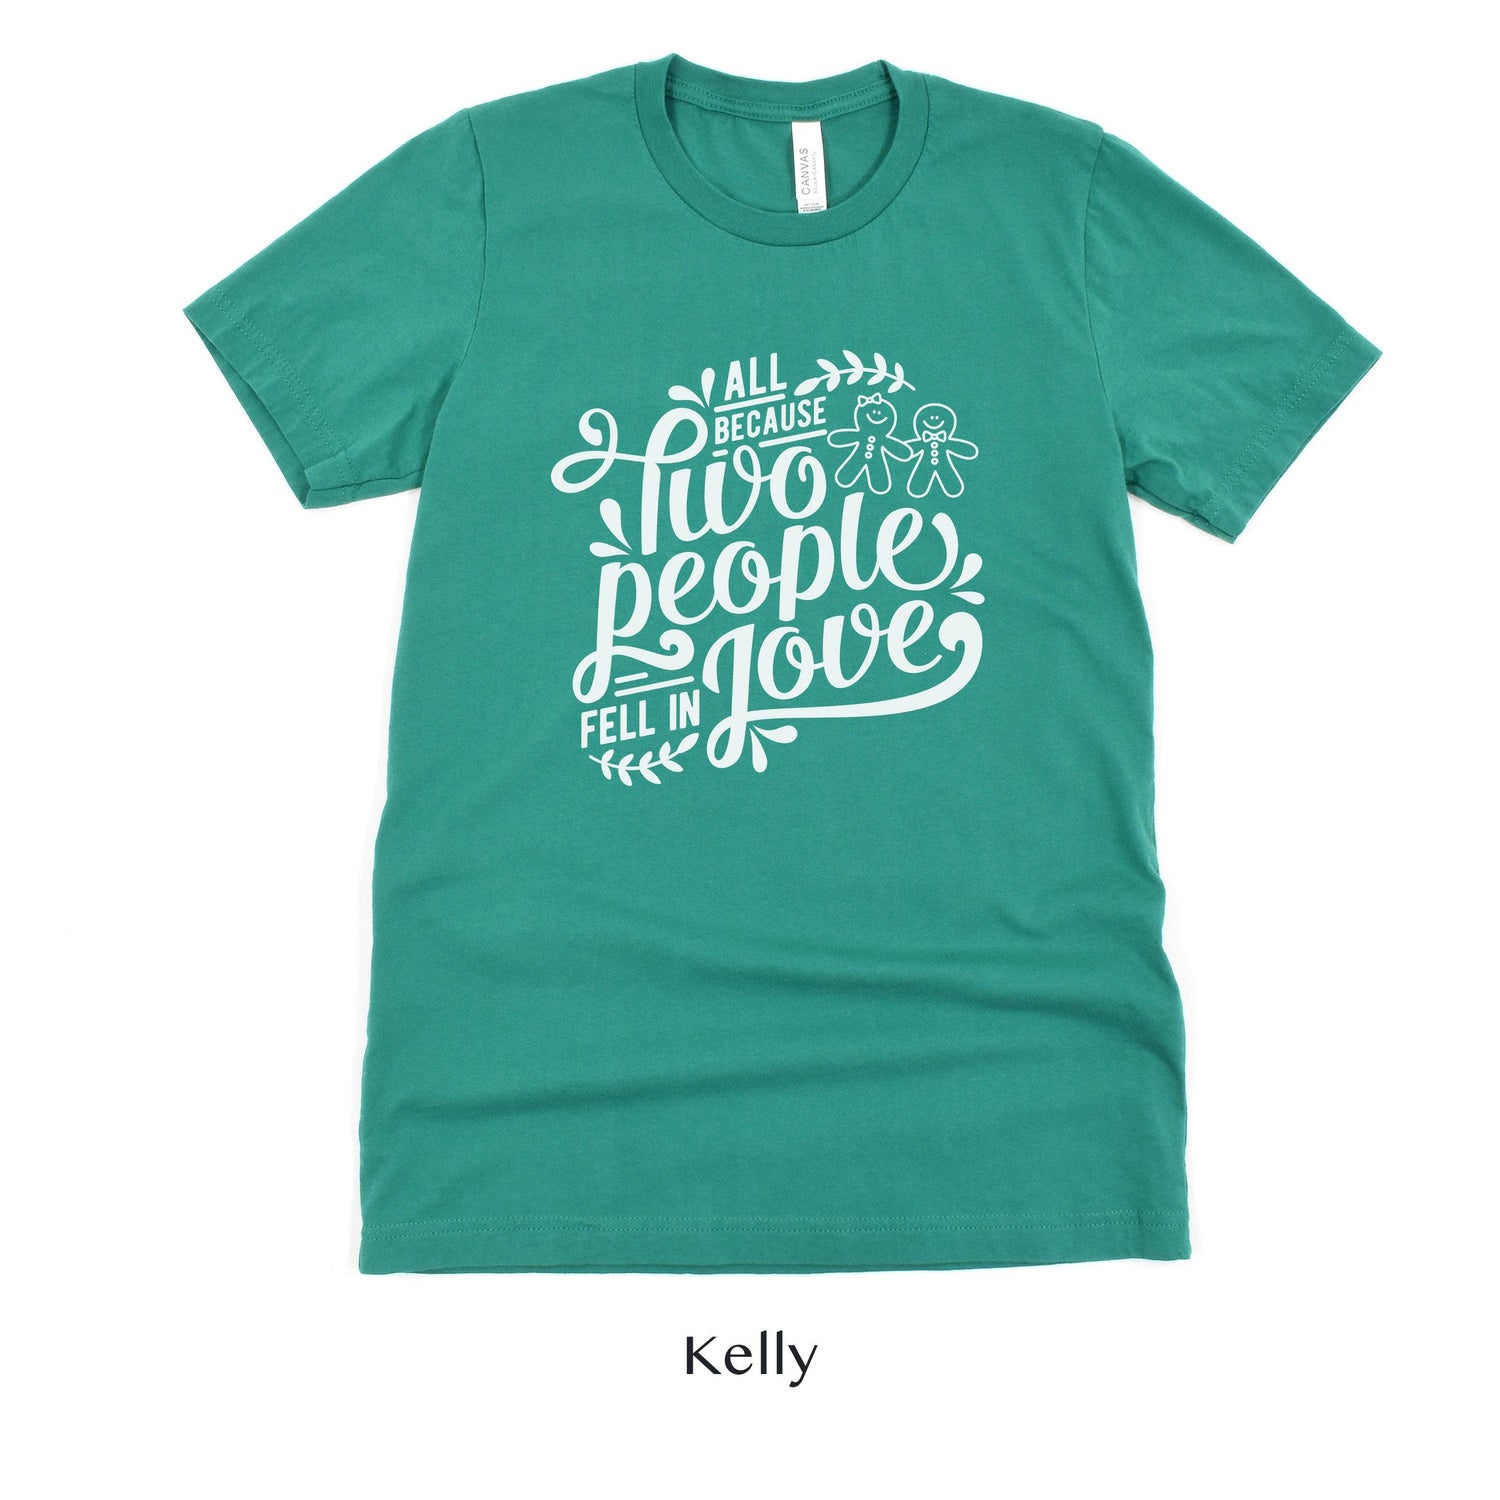 All Because Two People Fell In Love Gingerbread Men - Christmas Wedding Unisex t-shirt by Oaklynn Lane - Kelly Green Shirt